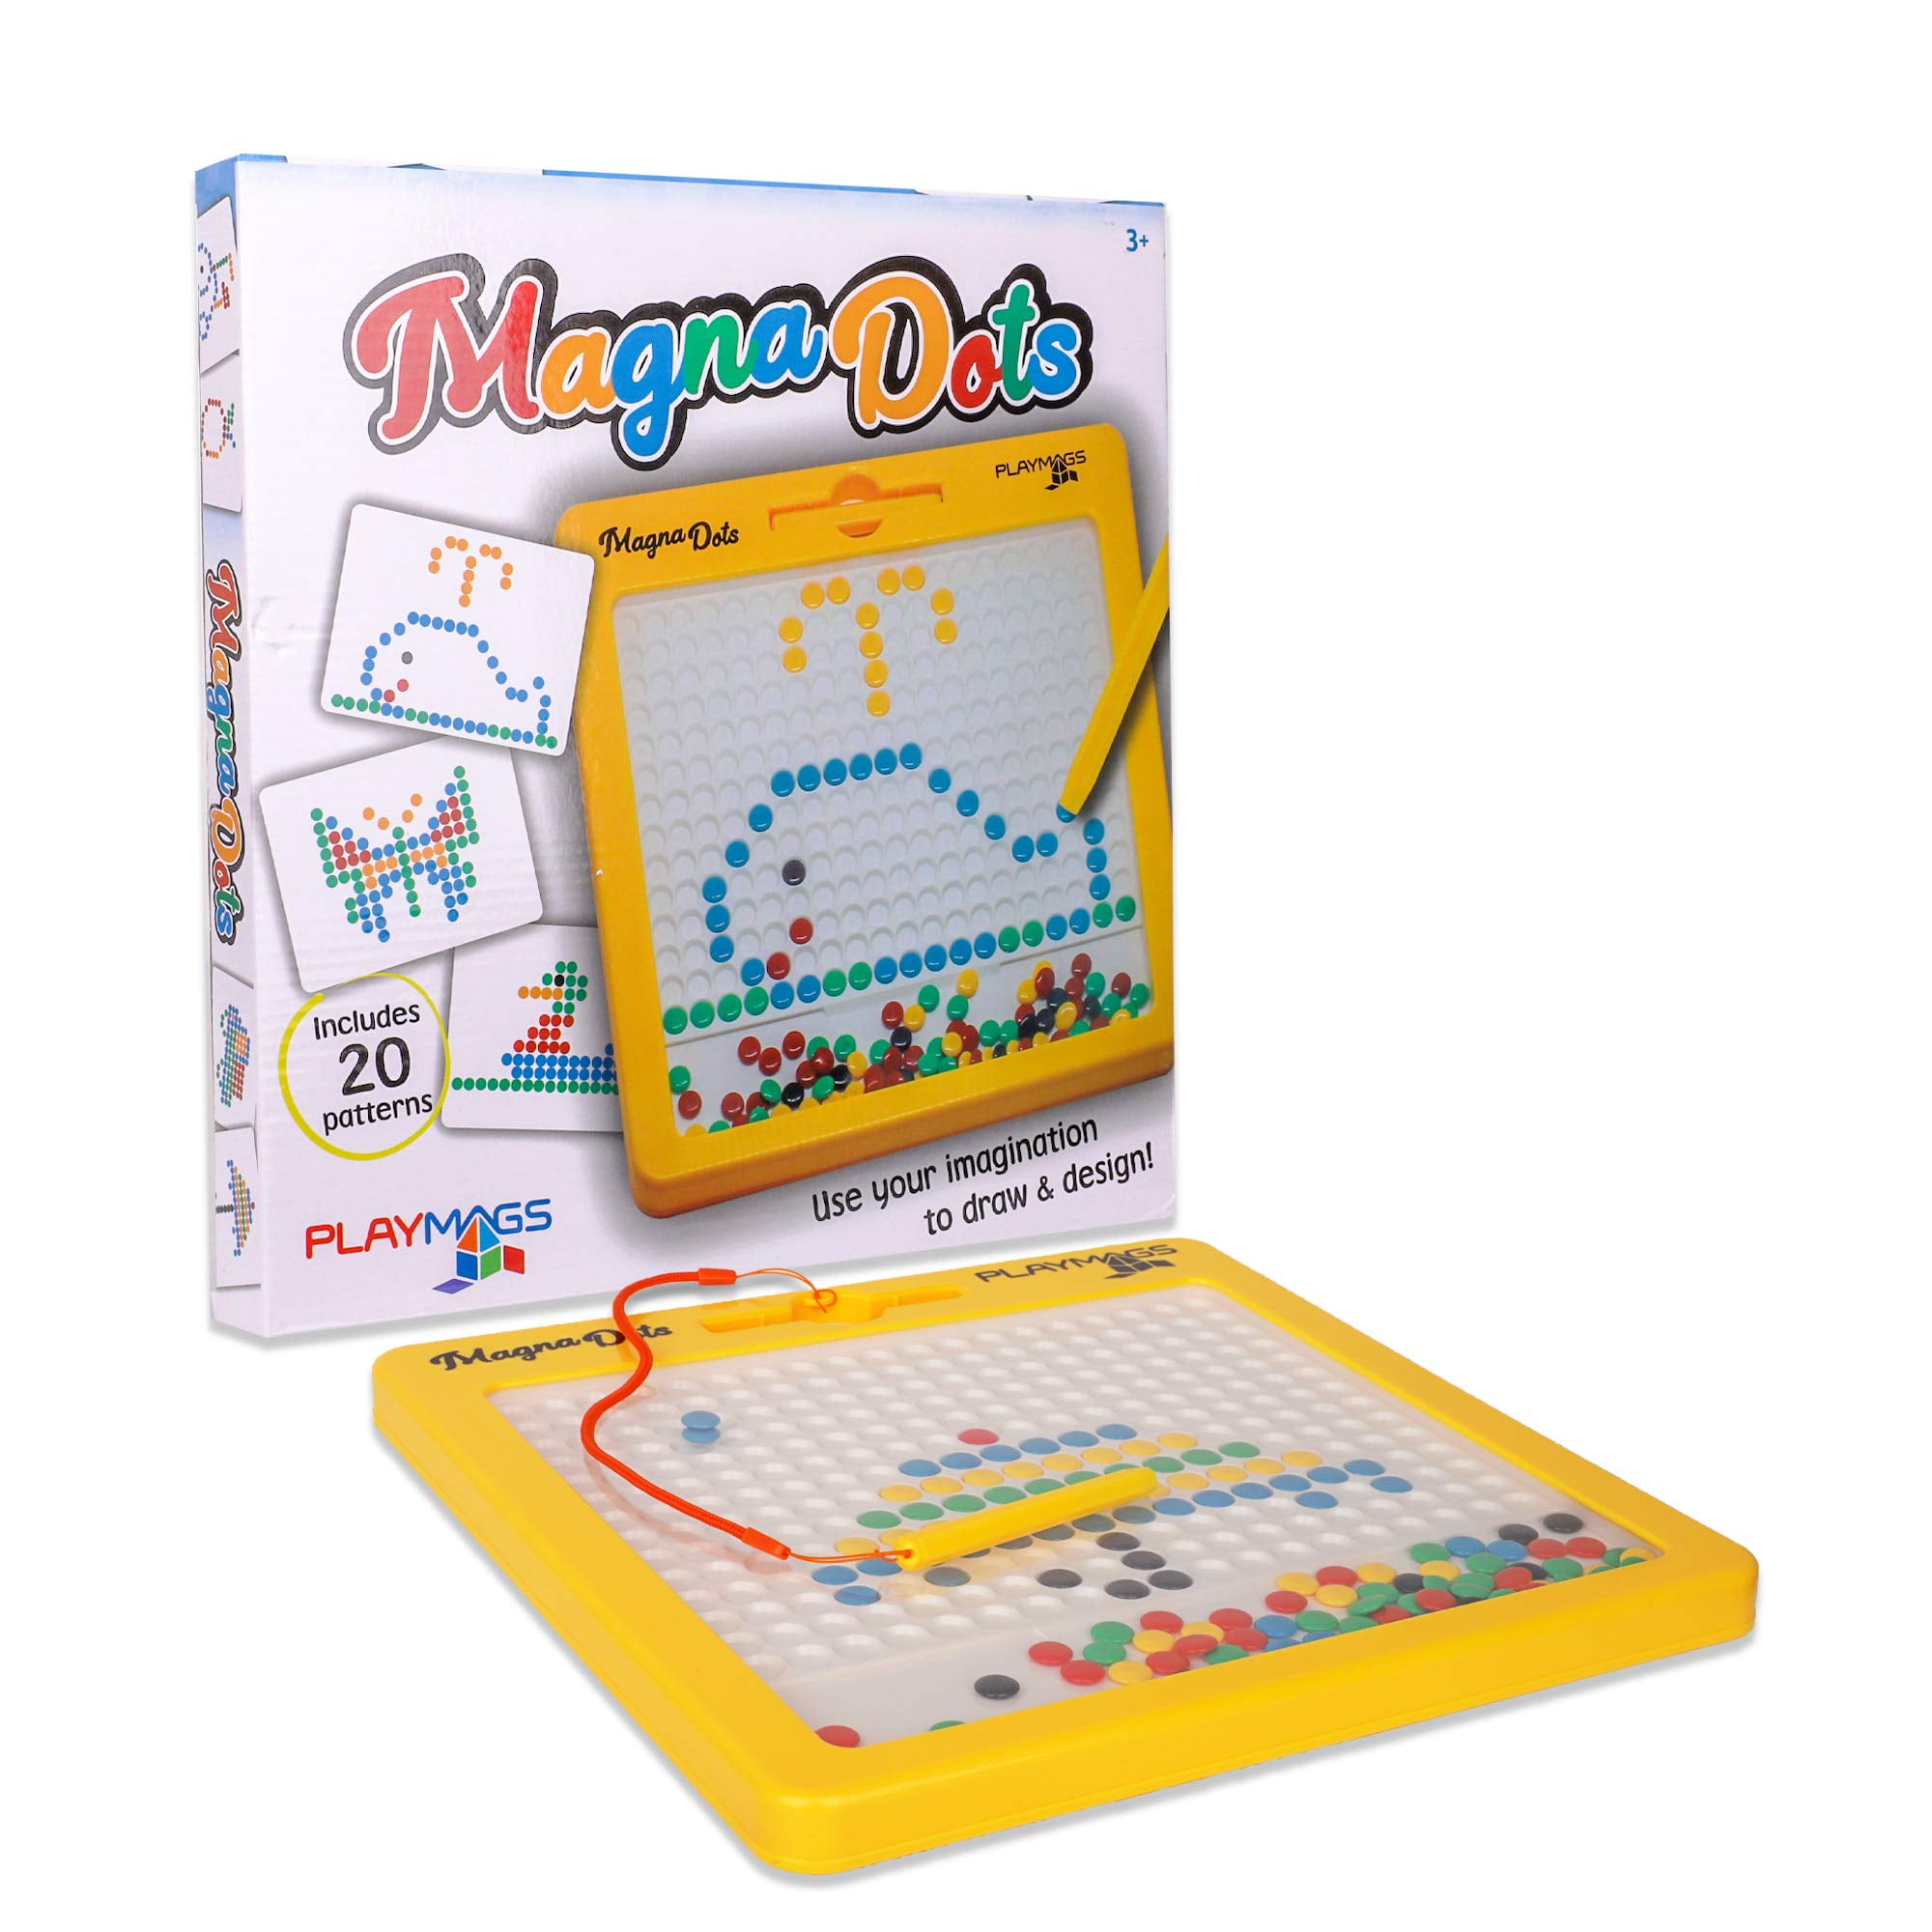 Playmags Magna Drawing Board  Fun Design & Draw Travel Tablet w/ 380 Built-In 